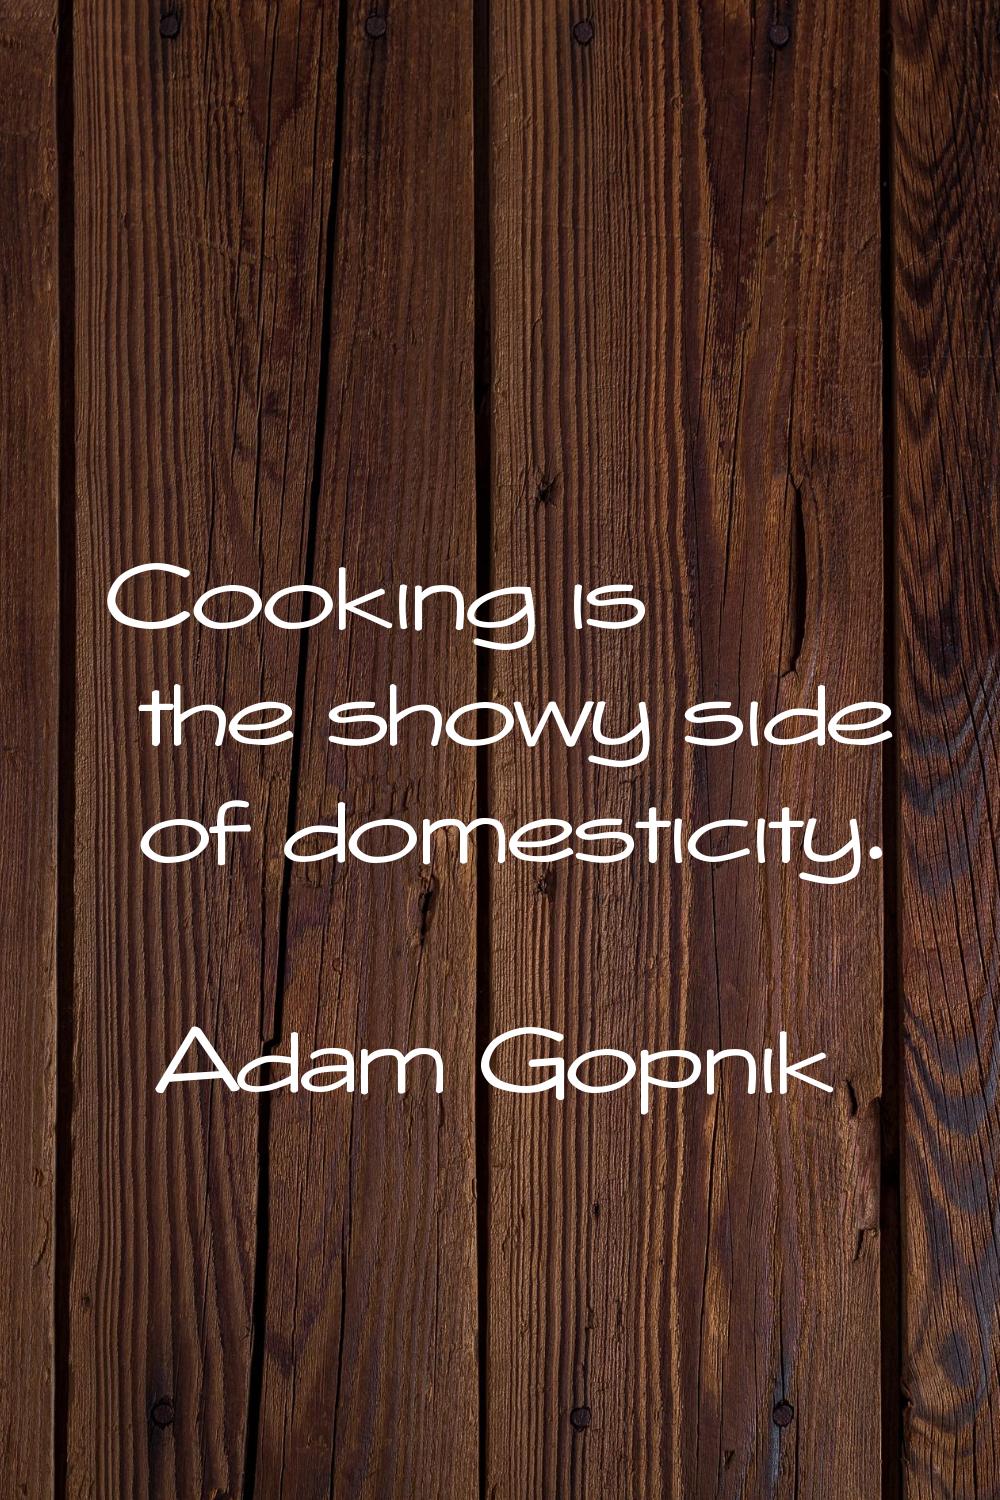 Cooking is the showy side of domesticity.